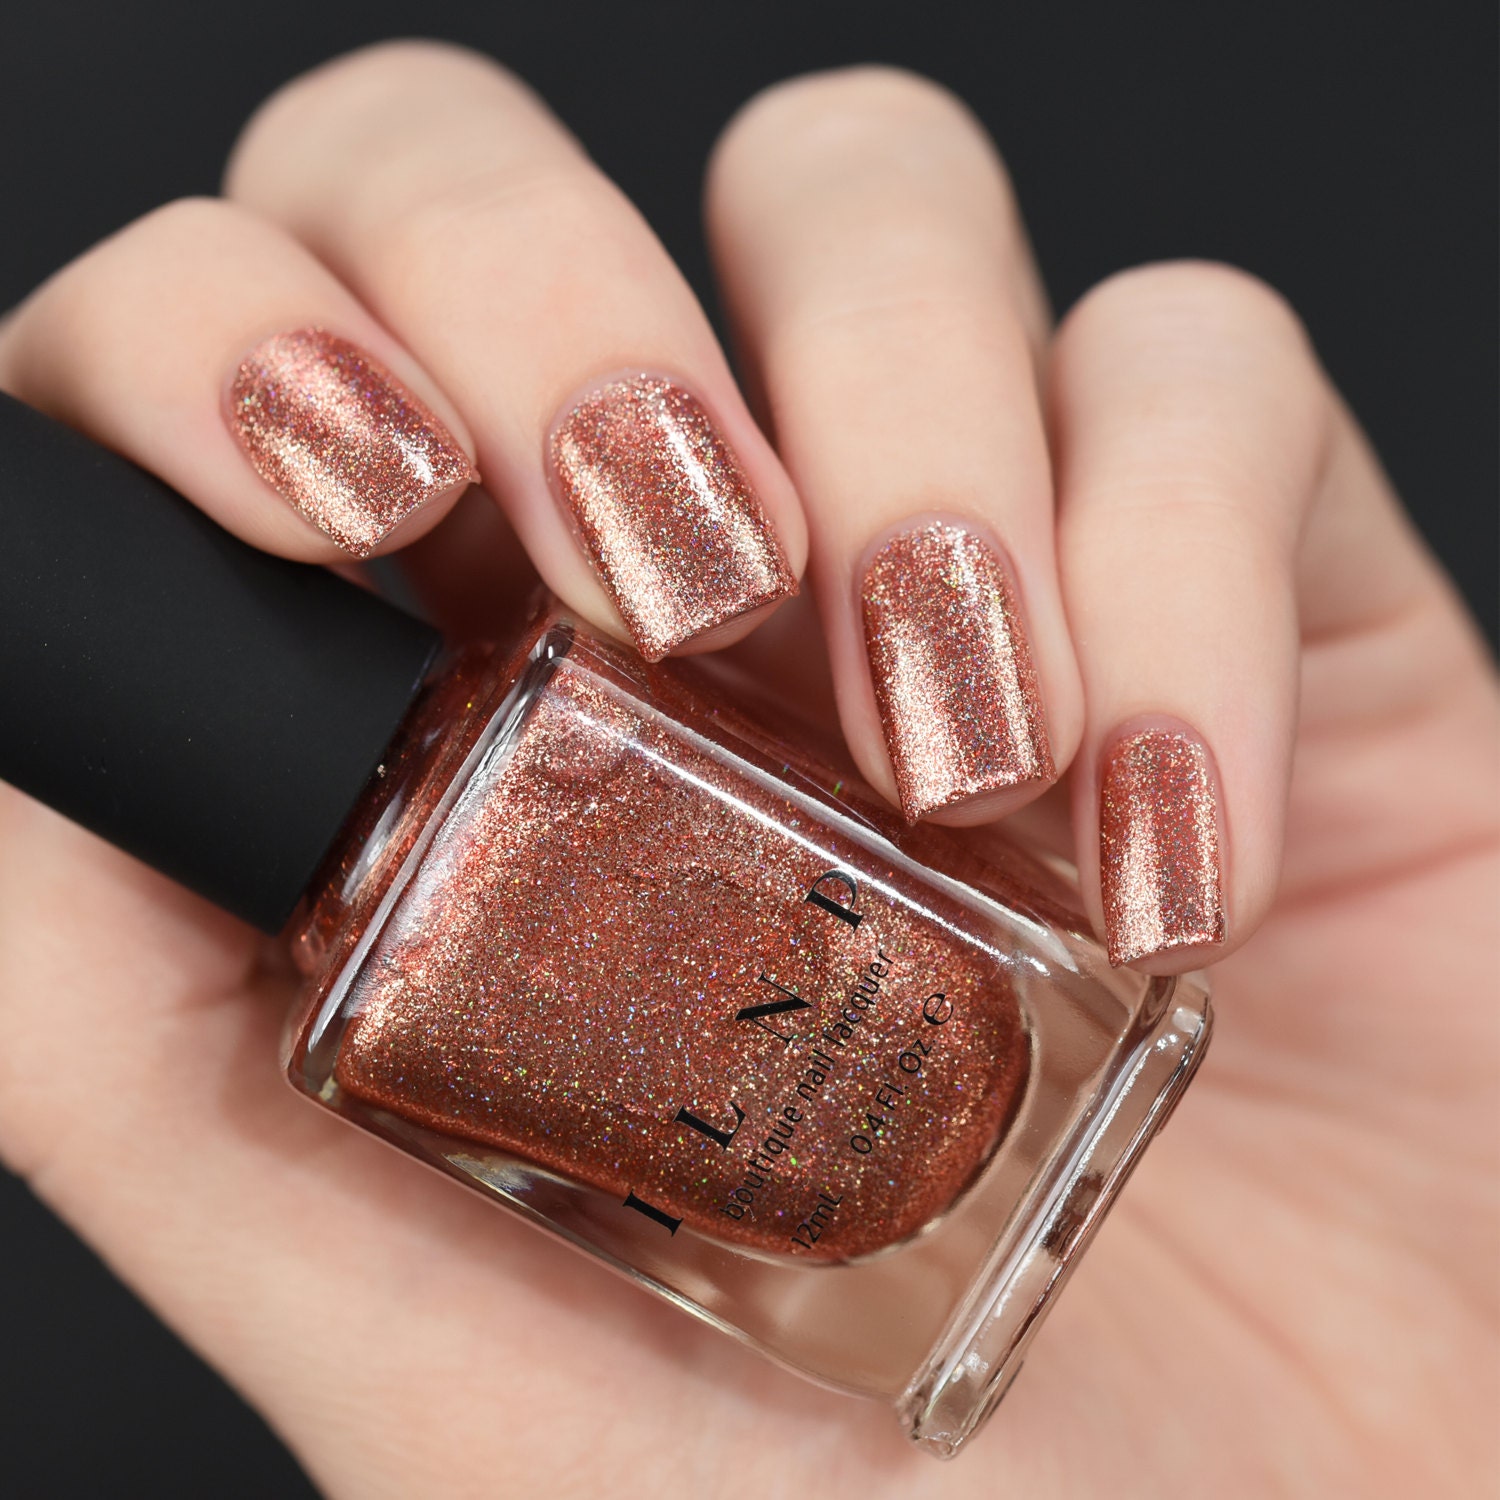 Copper Country ⛏  Northern Nail Polish